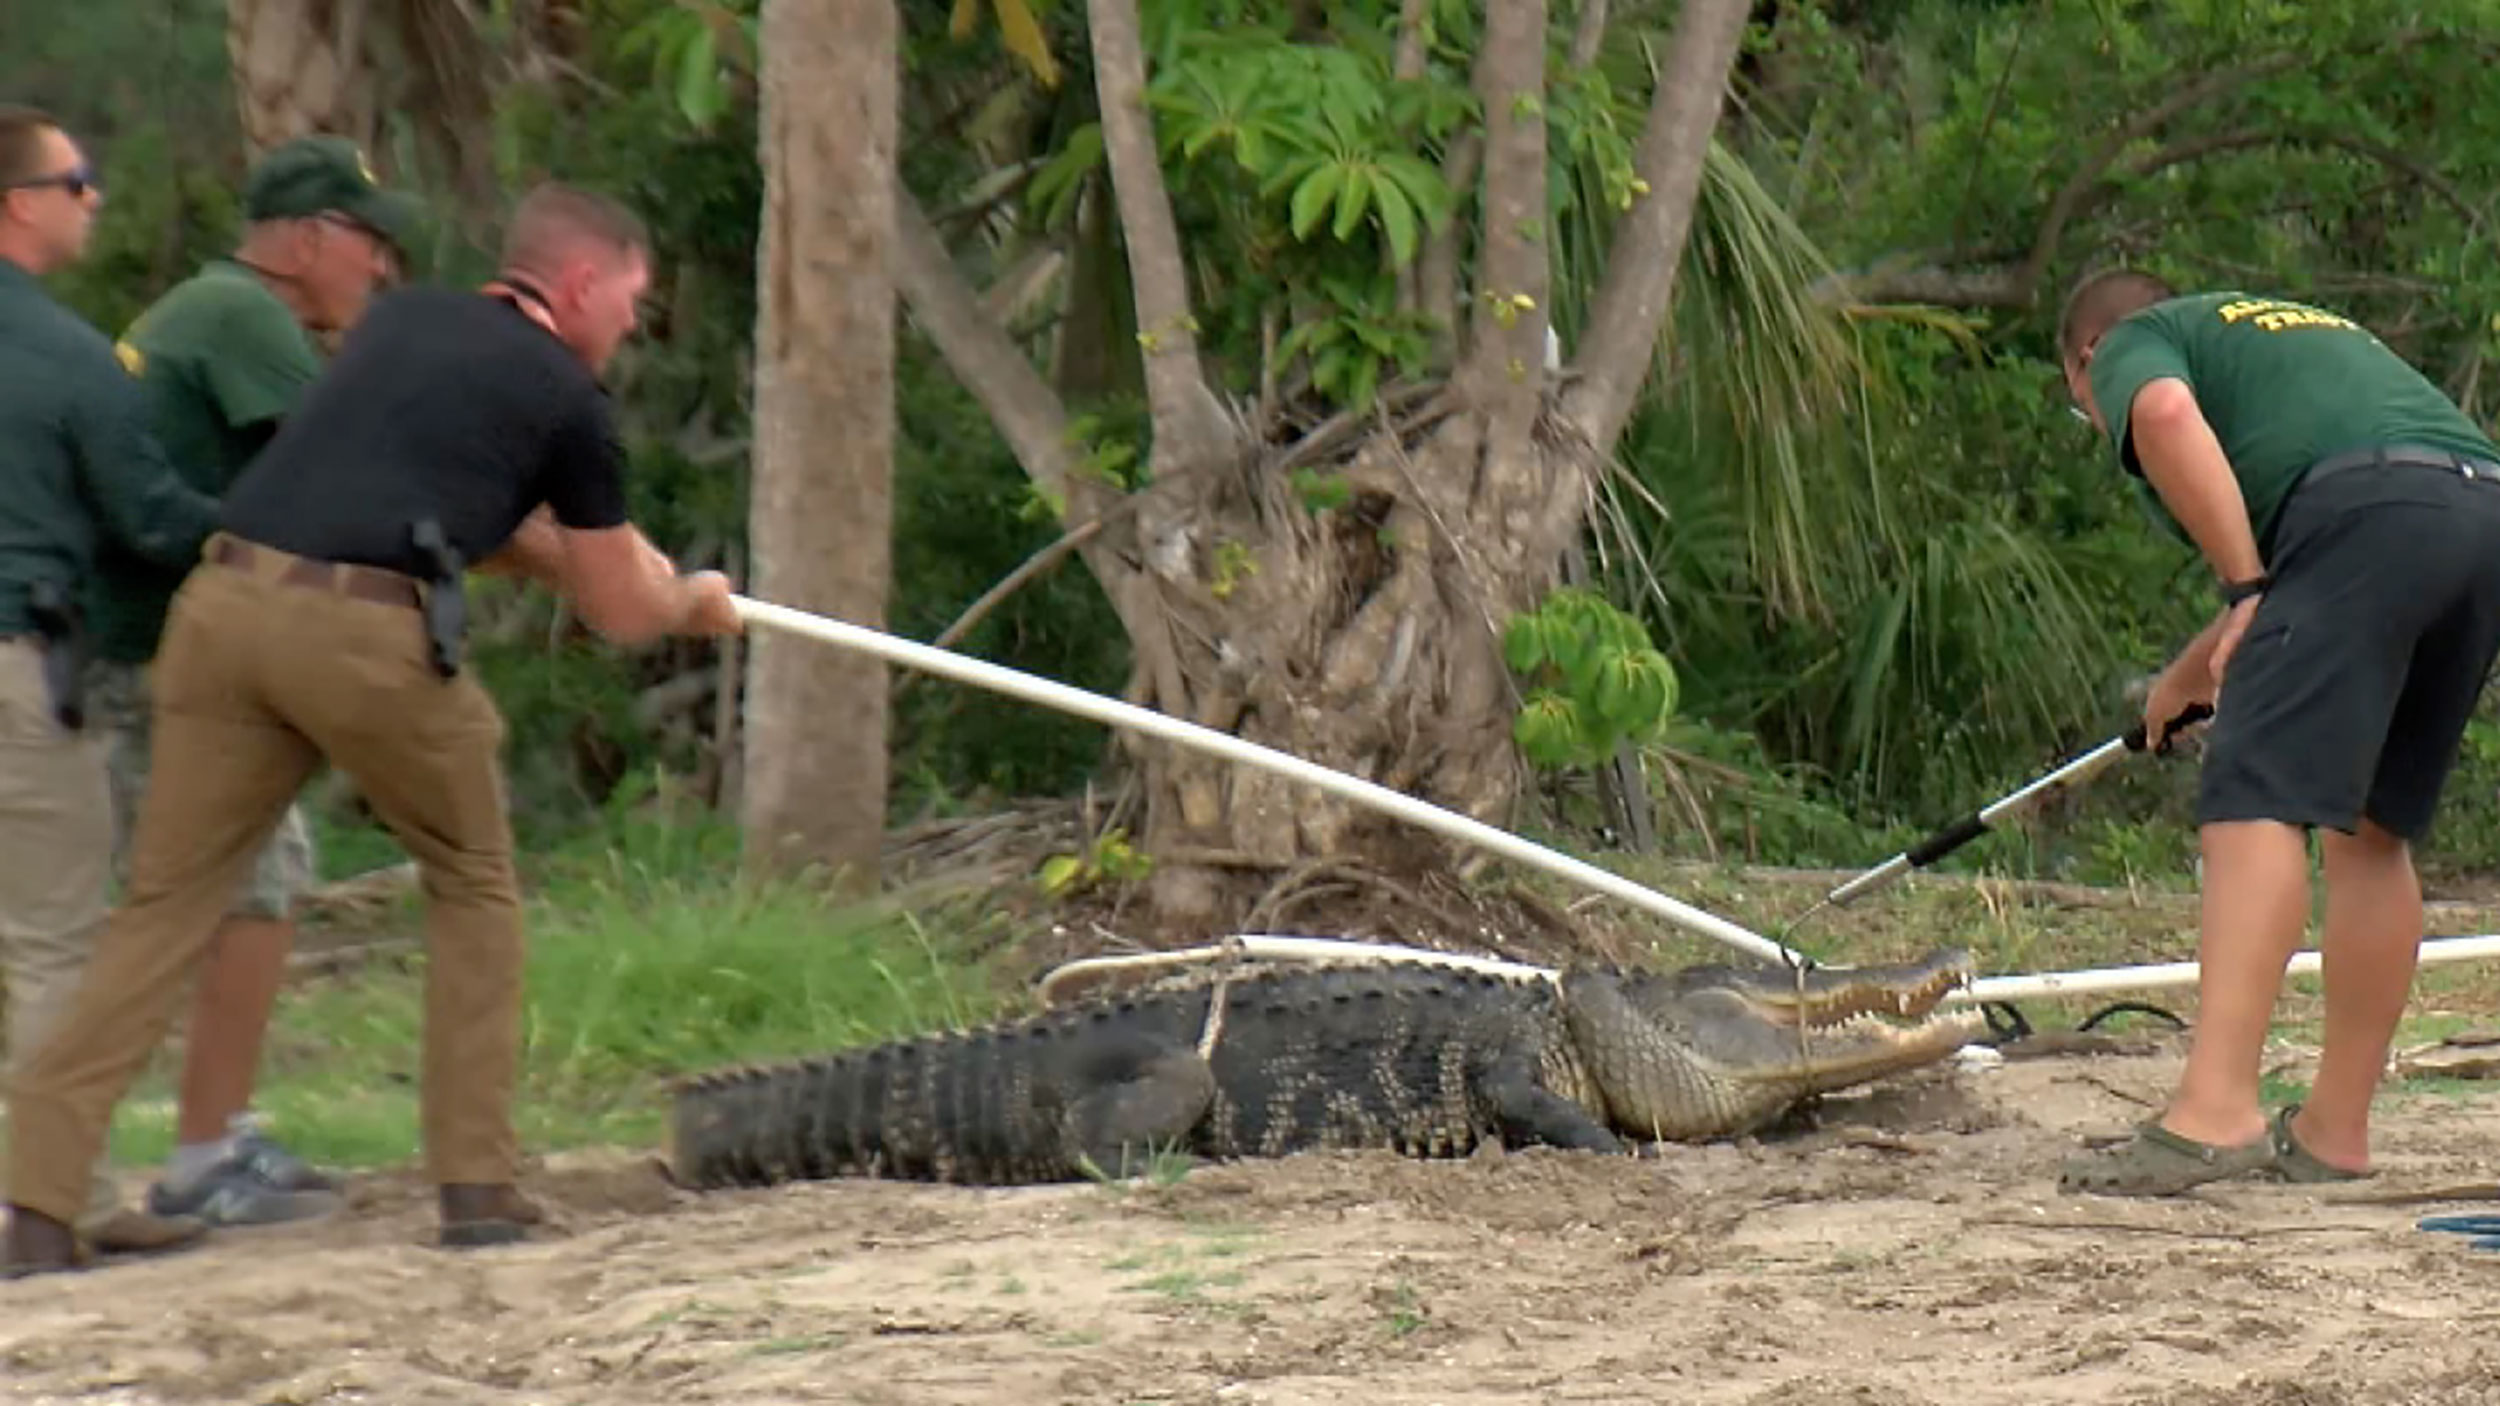 A Florida man's arm was amputated after he was attacked by a 10-foot  alligator